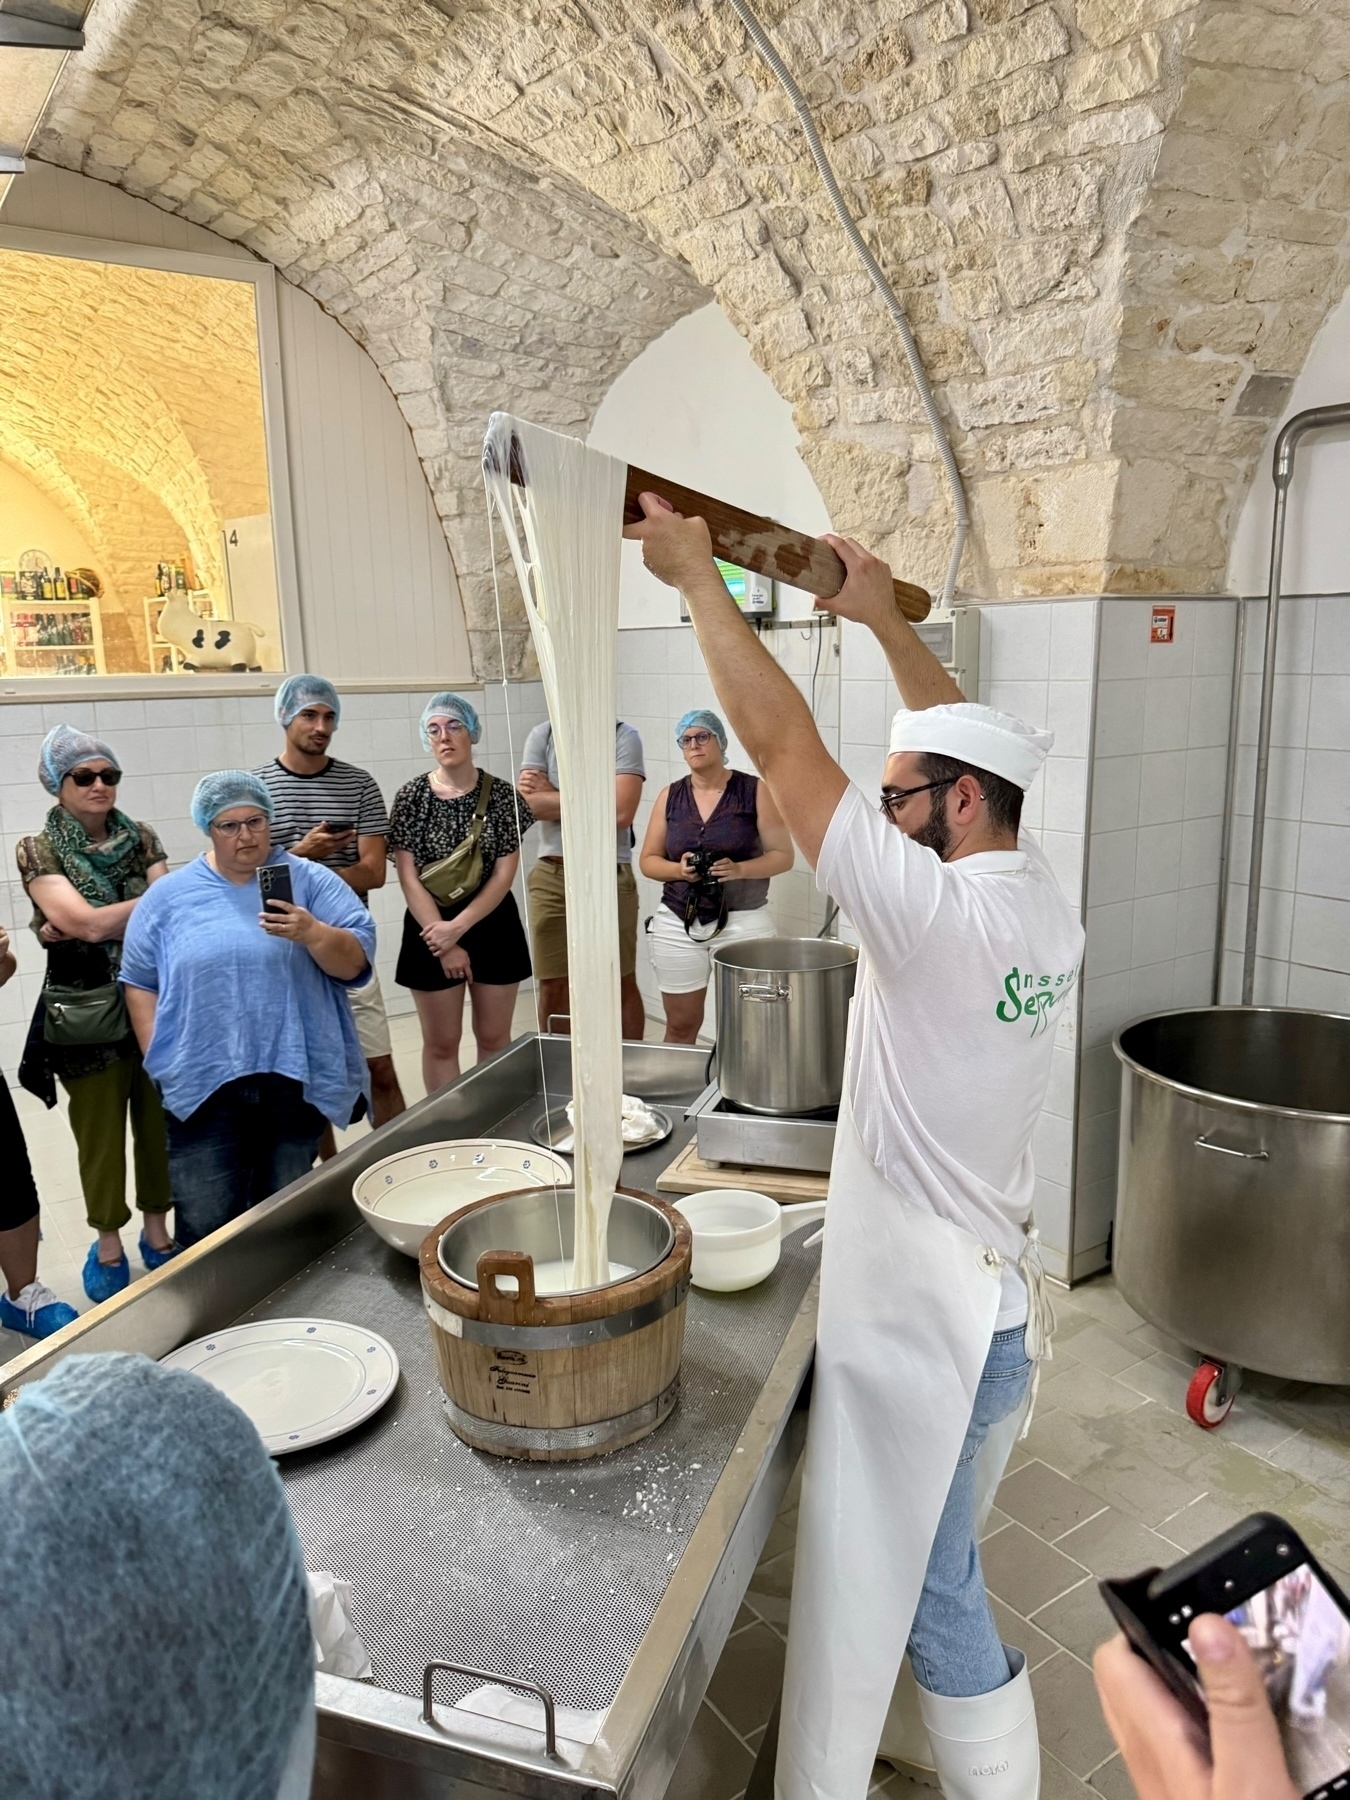 A group of people, wearing hair nets, watches a cheesemaker demonstrating the process of making cheese in a rustic, stone-vaulted room. The cheesemaker is pulling and stretching the cheese curds, which are cascading into a wooden barrel.